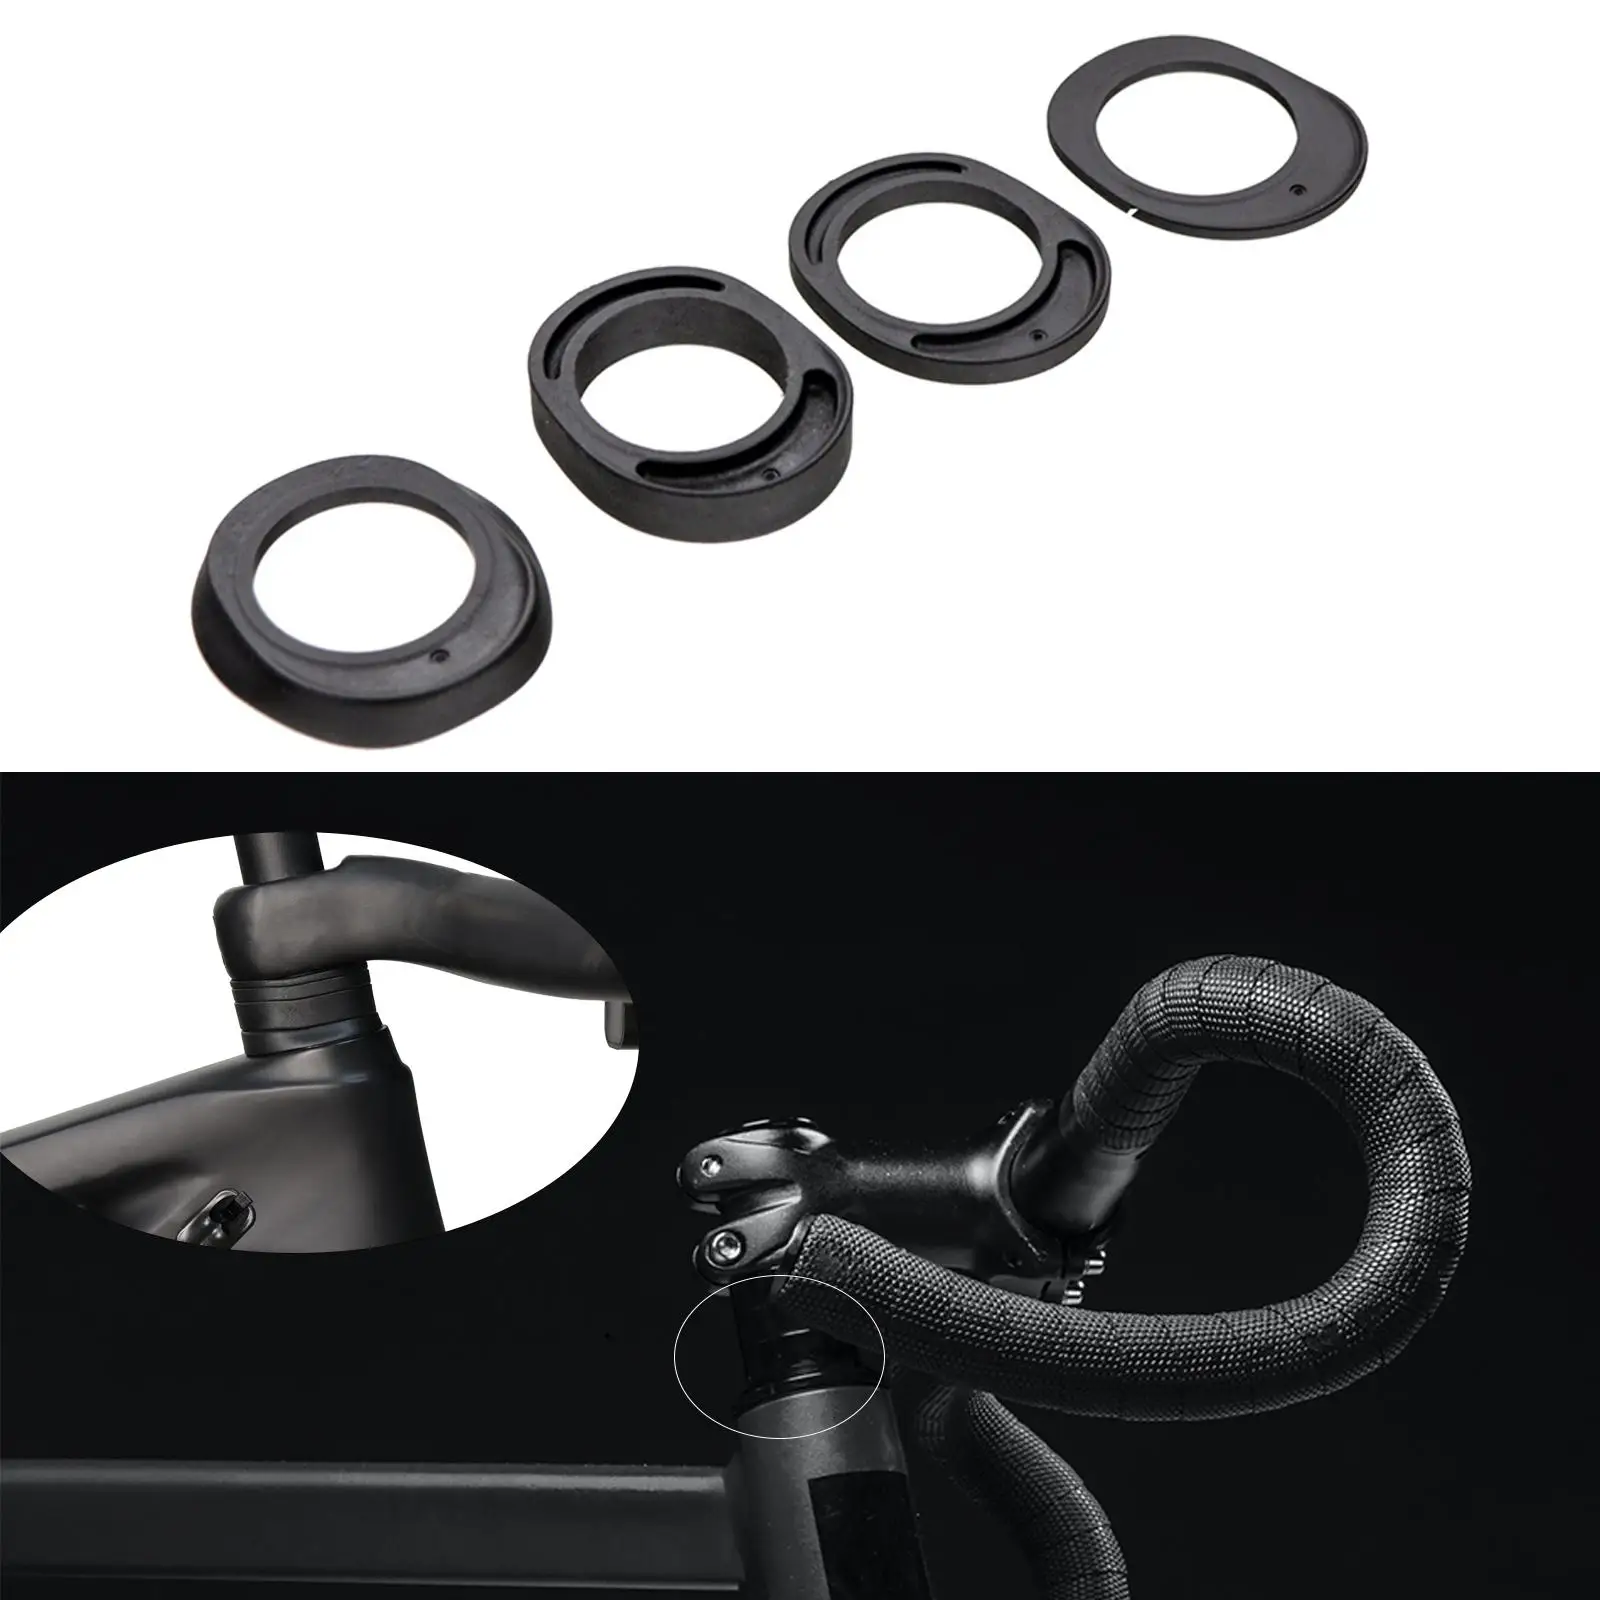 4x Bike Curved Handlebar Spacer Headset Tools Durable Raise up Adjustable for